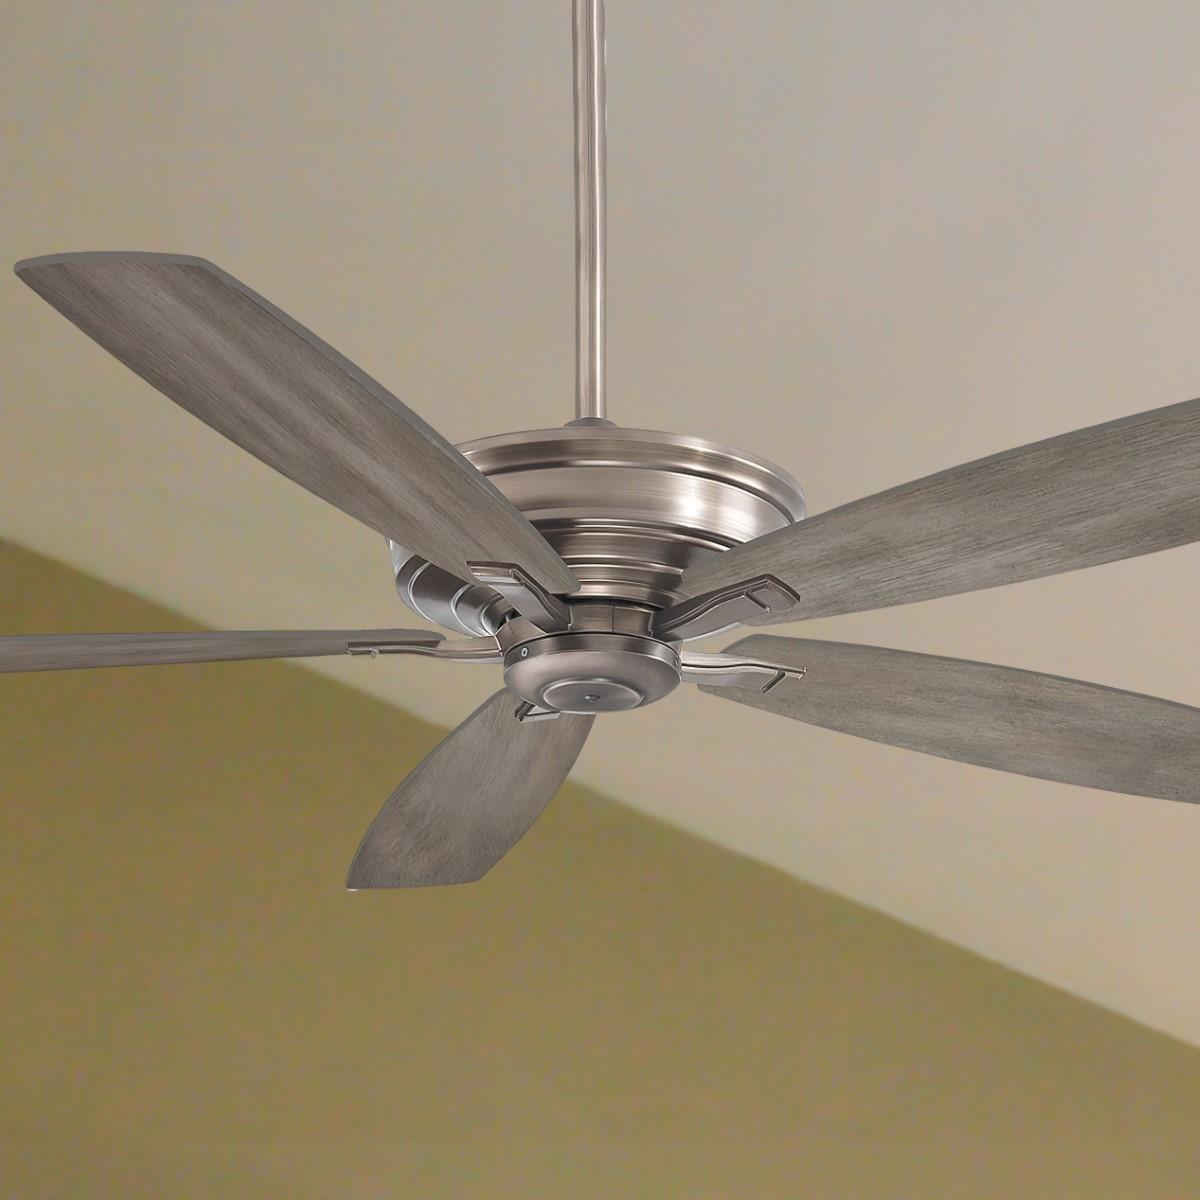 Kafe XL 60 Inch Ceiling Fan With Remote